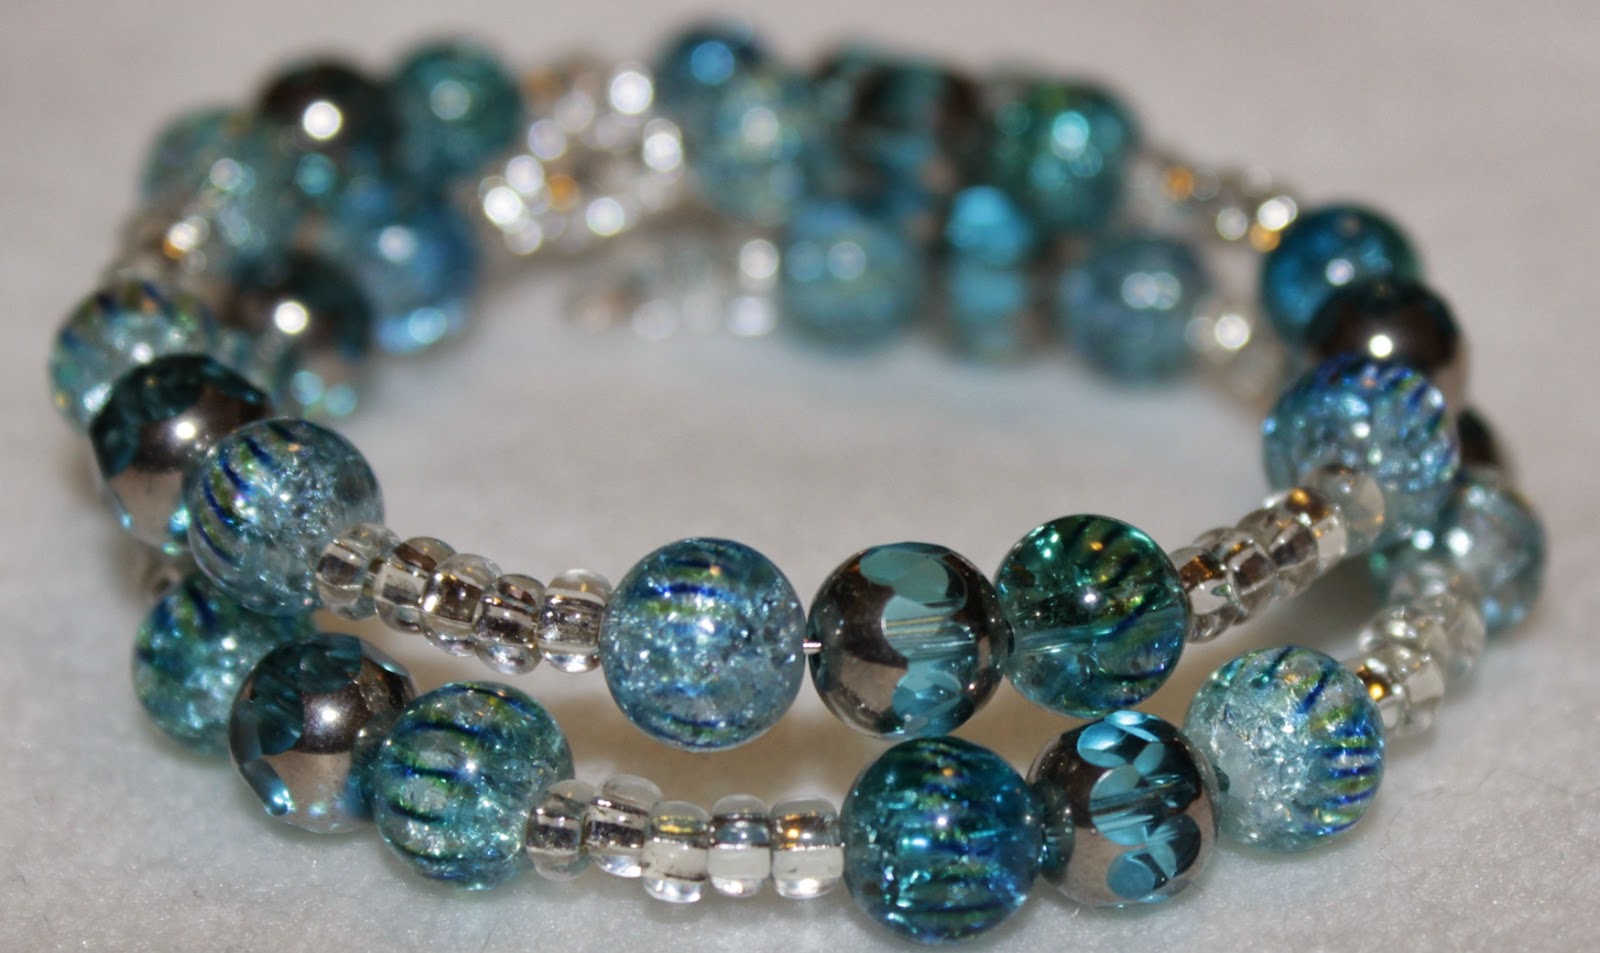 Aira Artistry: March Madness: Blue Moonlight Memory Wire Bracelet